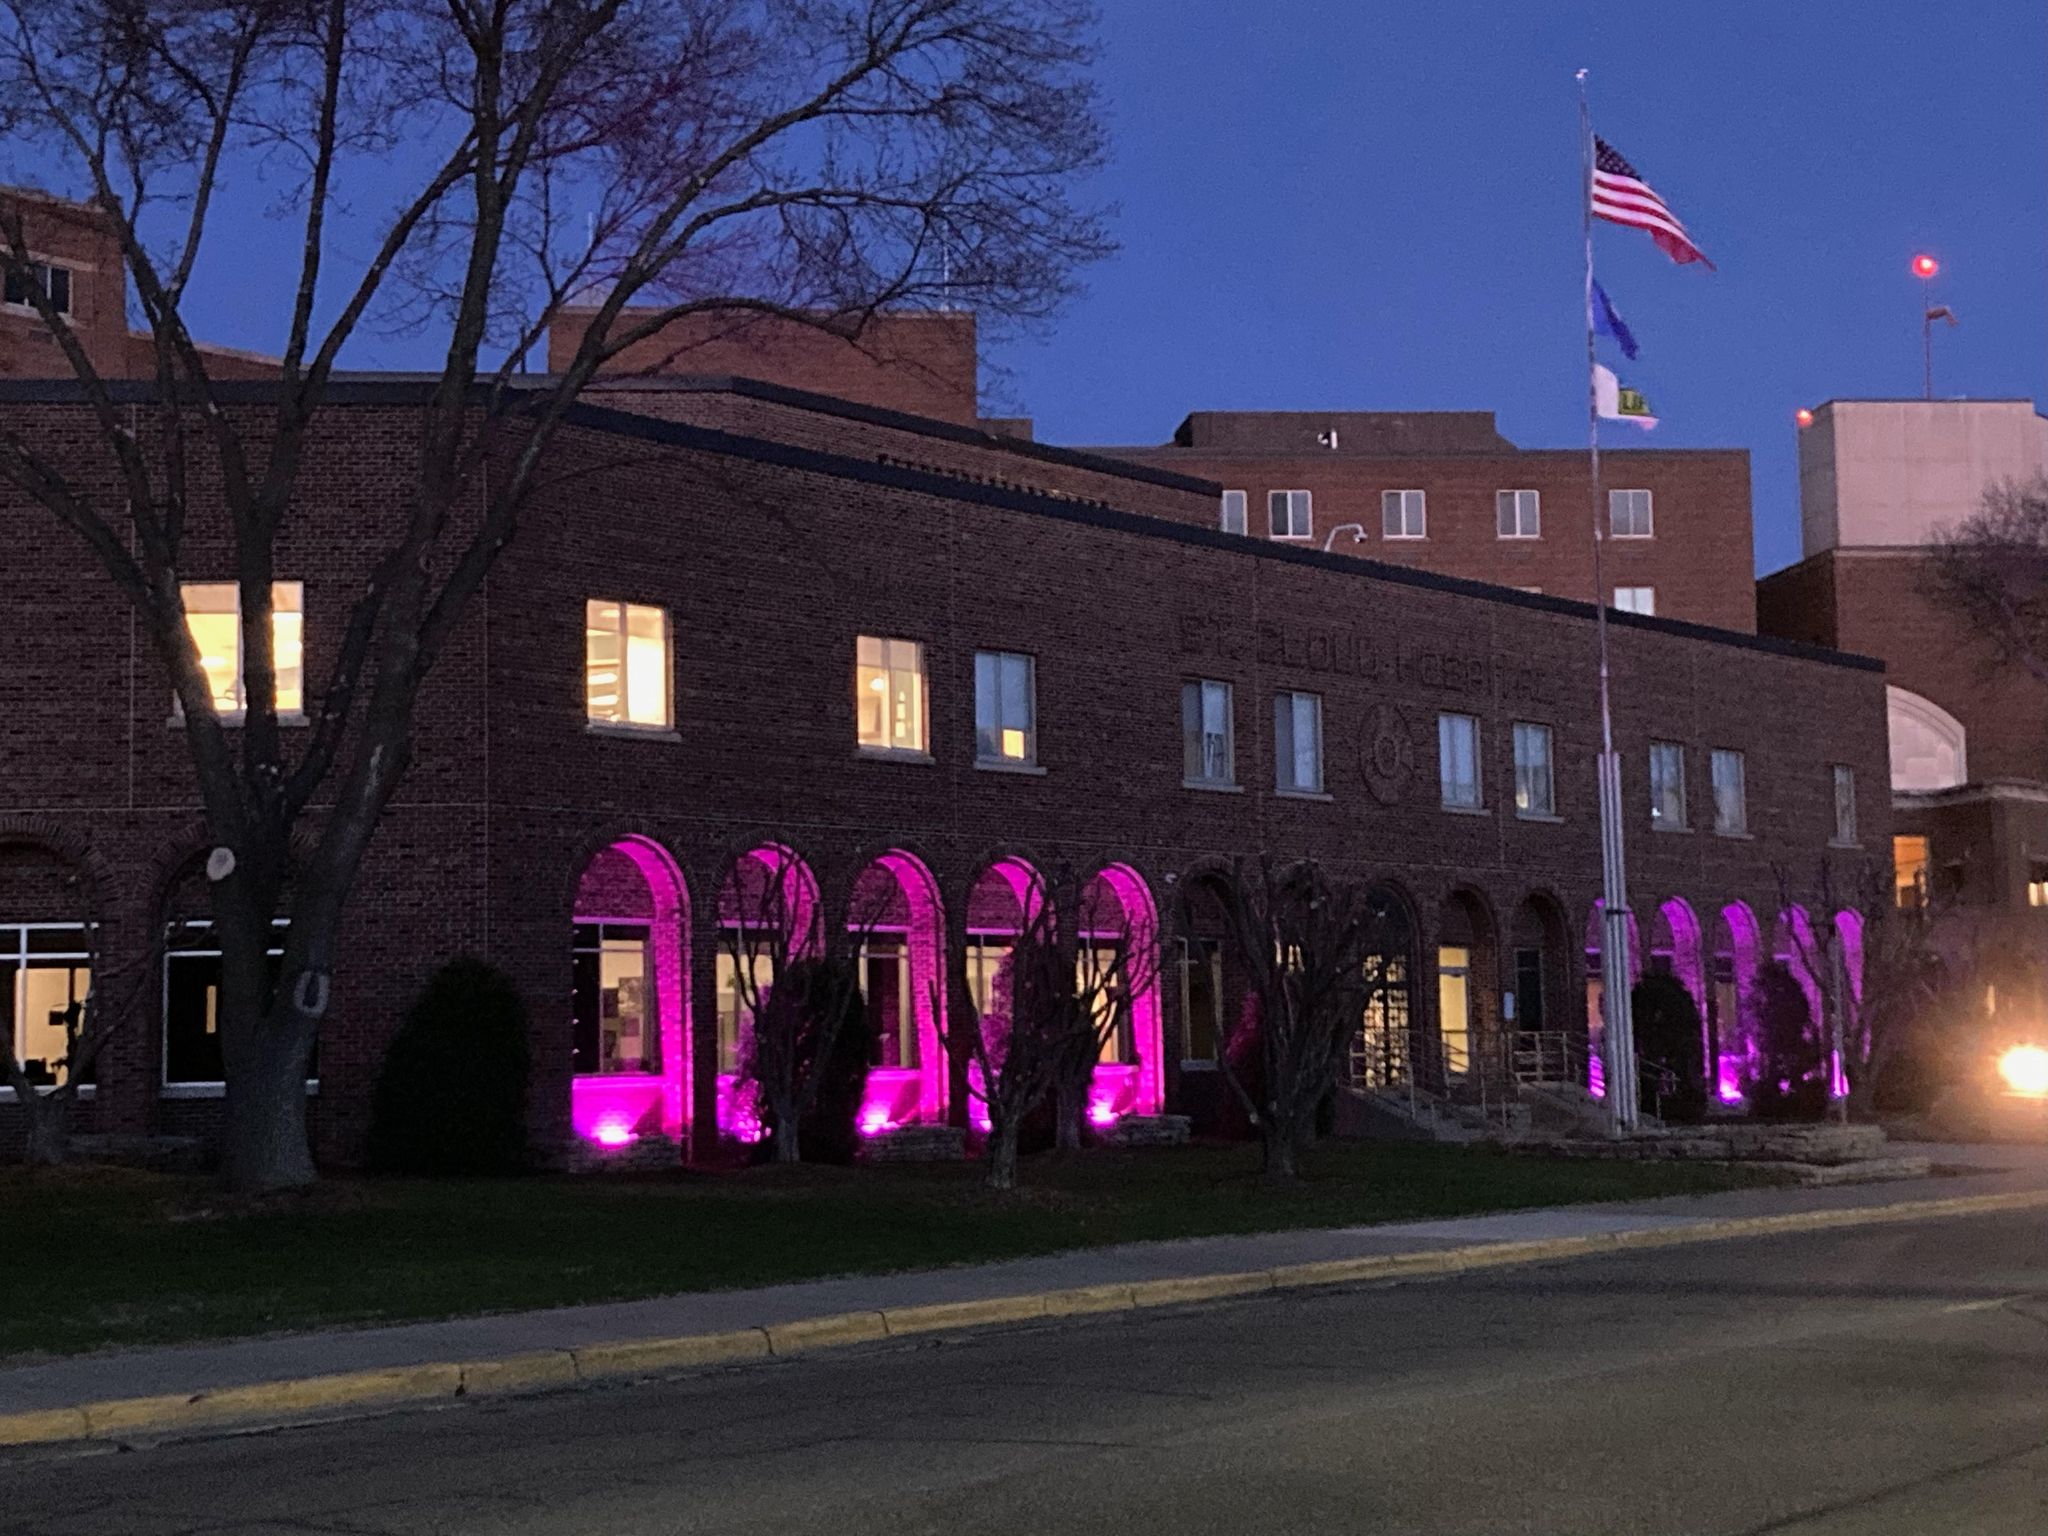 Photo of CentraCare – St. Cloud Hospital is lit up in purple lights for Stroke Awareness Month.